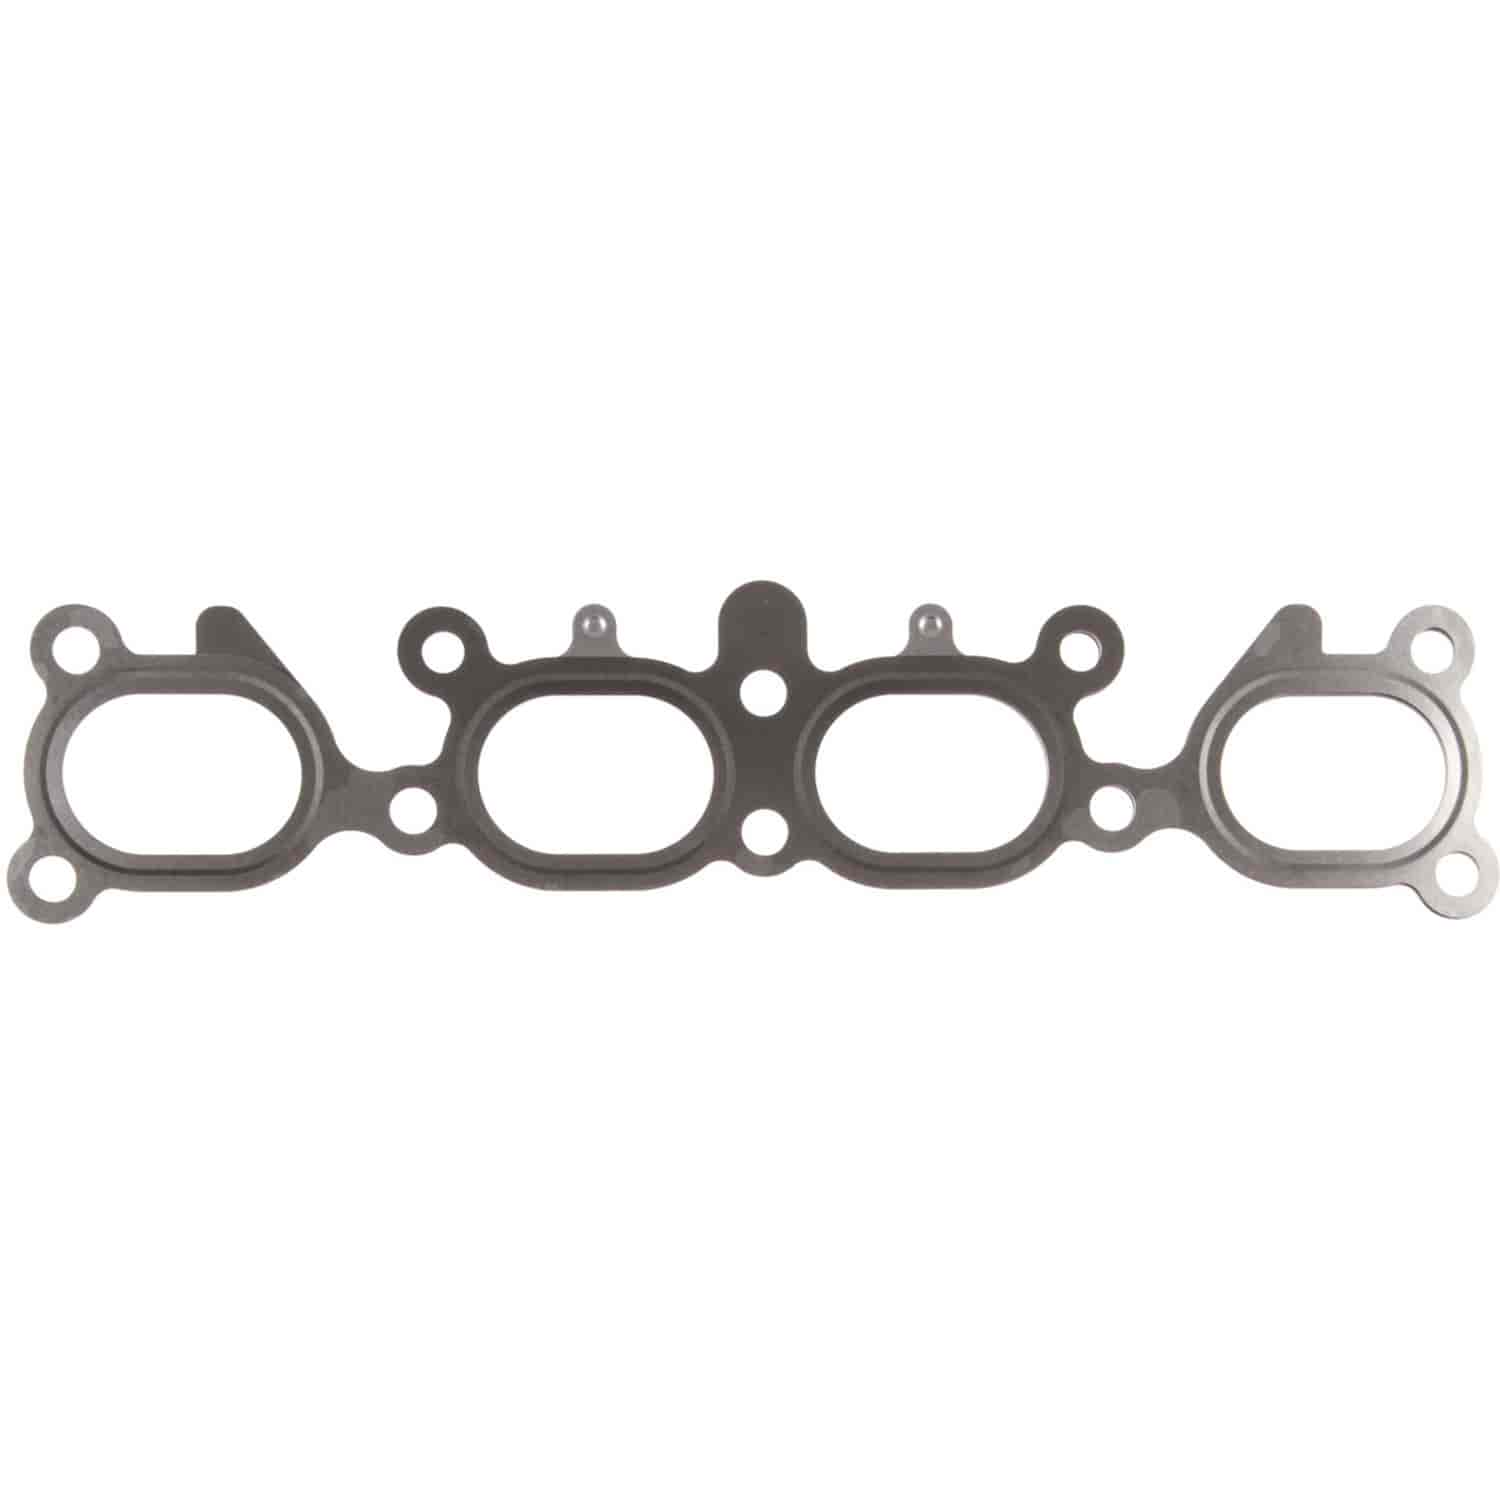 Exhaust Manifold Set Ford-Pass 122 2.0L Probe 93-95